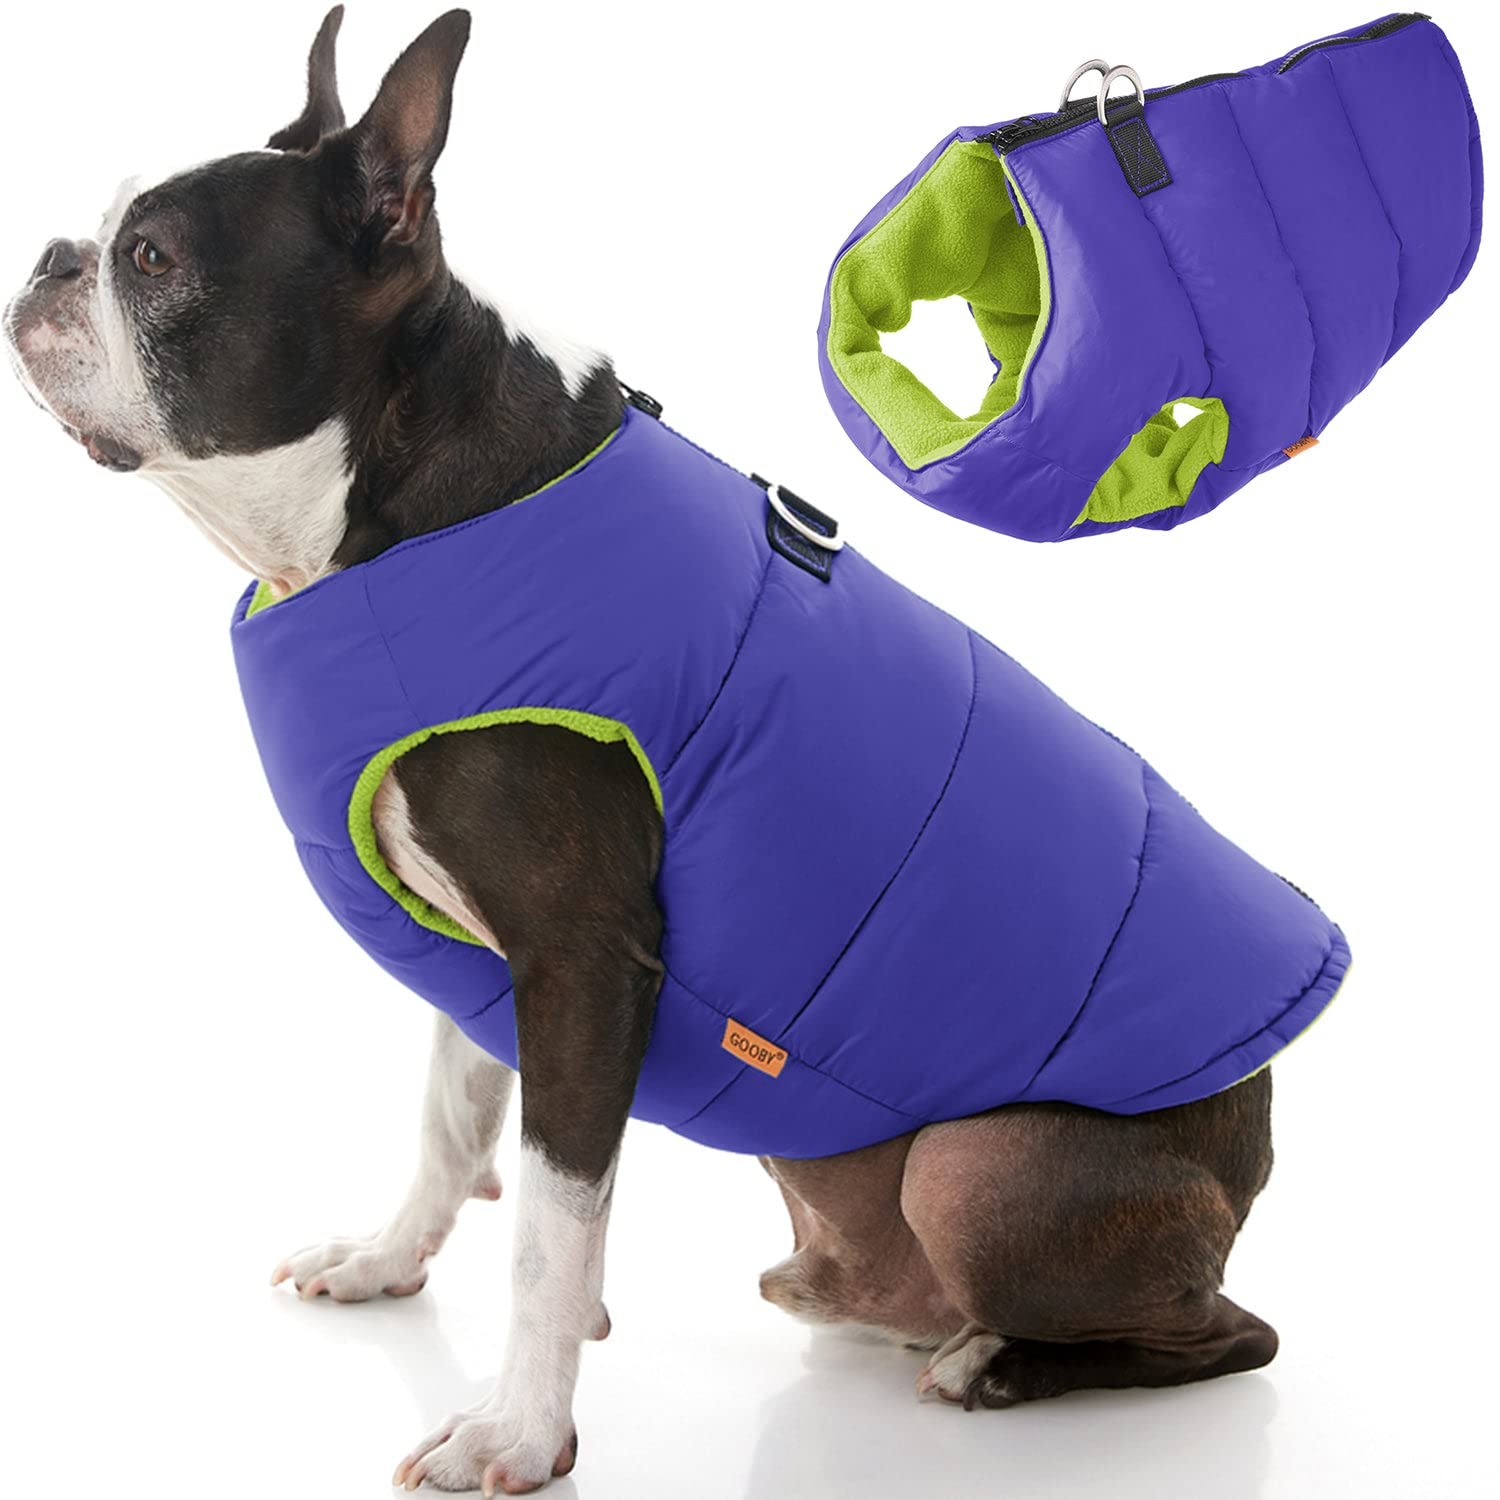 Gooby Padded Vest Dog Jacket - Solid Purple, X-Small - Warm Zip Up Dog Vest Fleece Jacket With Dual D Ring Leash - Water Resista